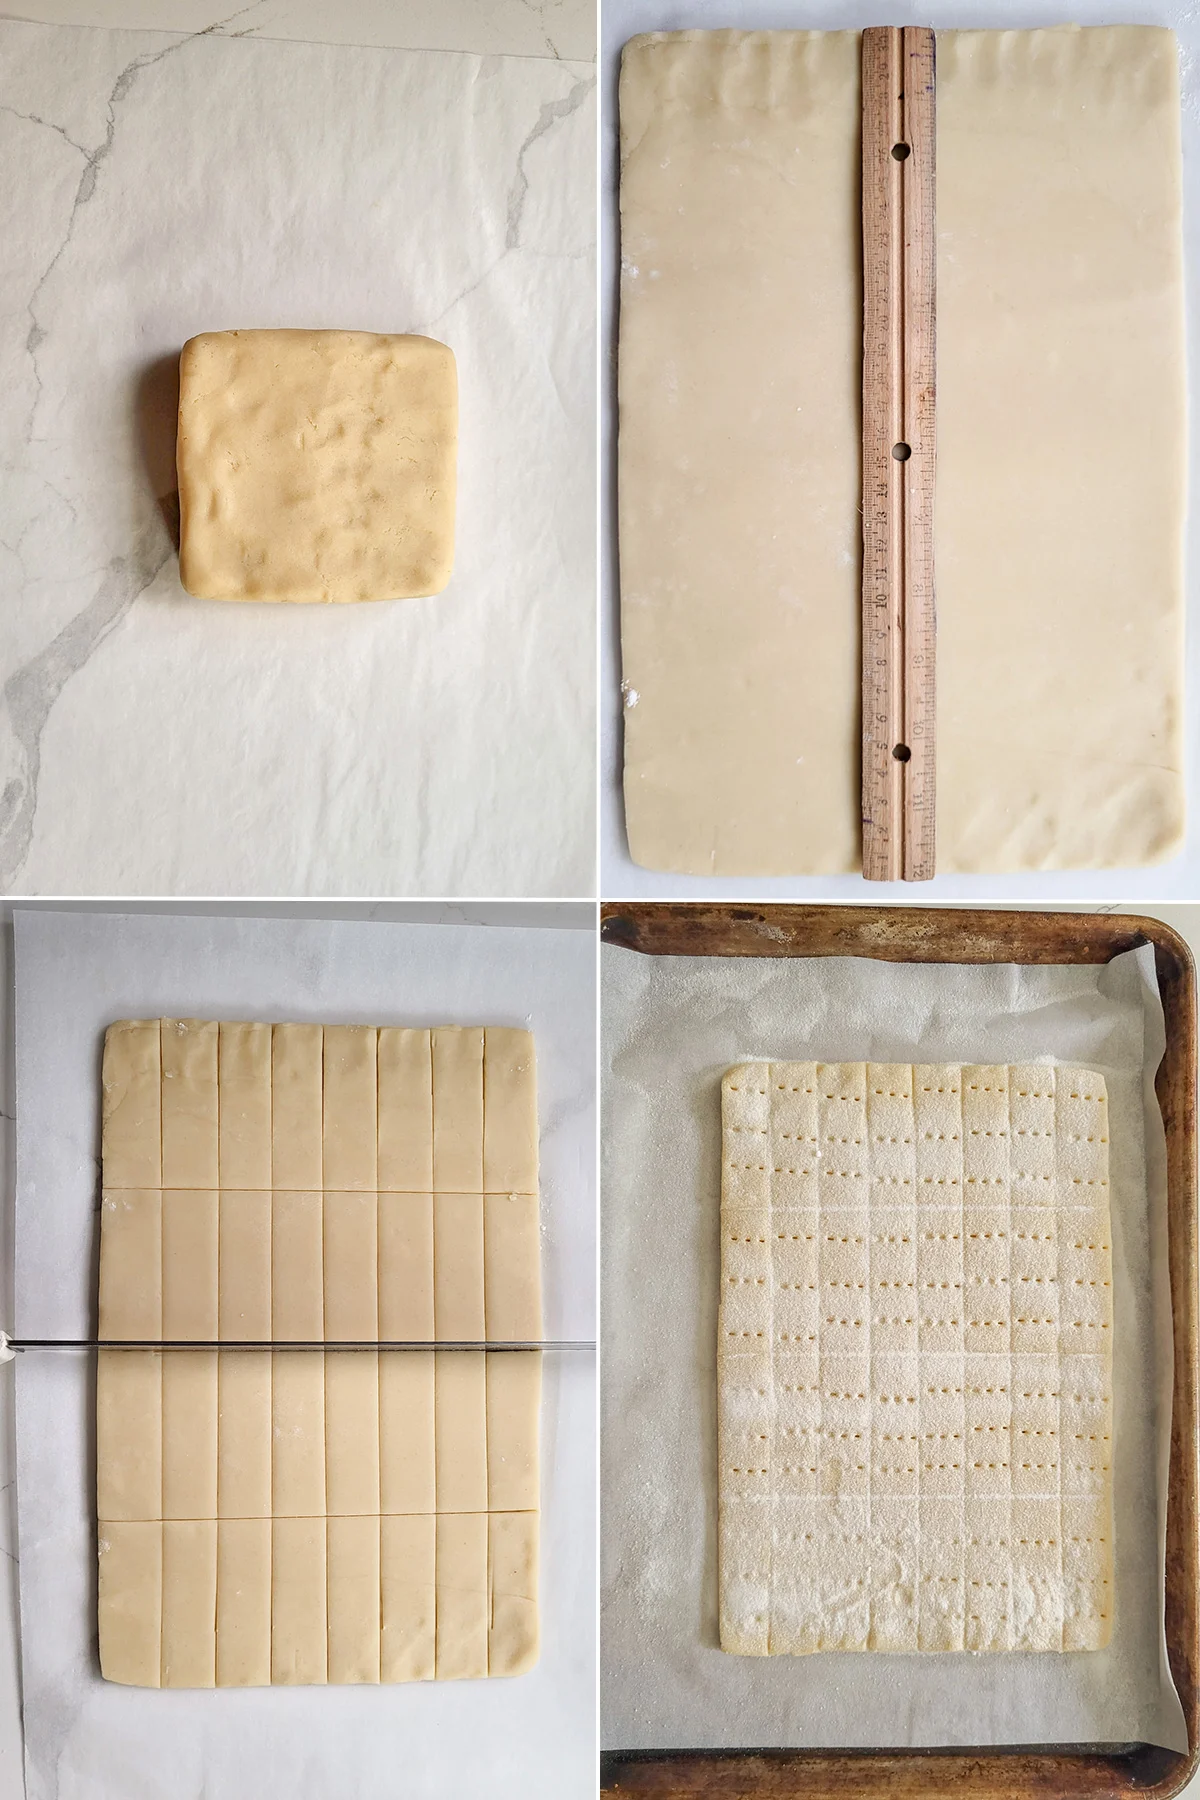 a square of dough, a rectangle of dough, a knife cutting cookies, a fork poking holes in cookies.